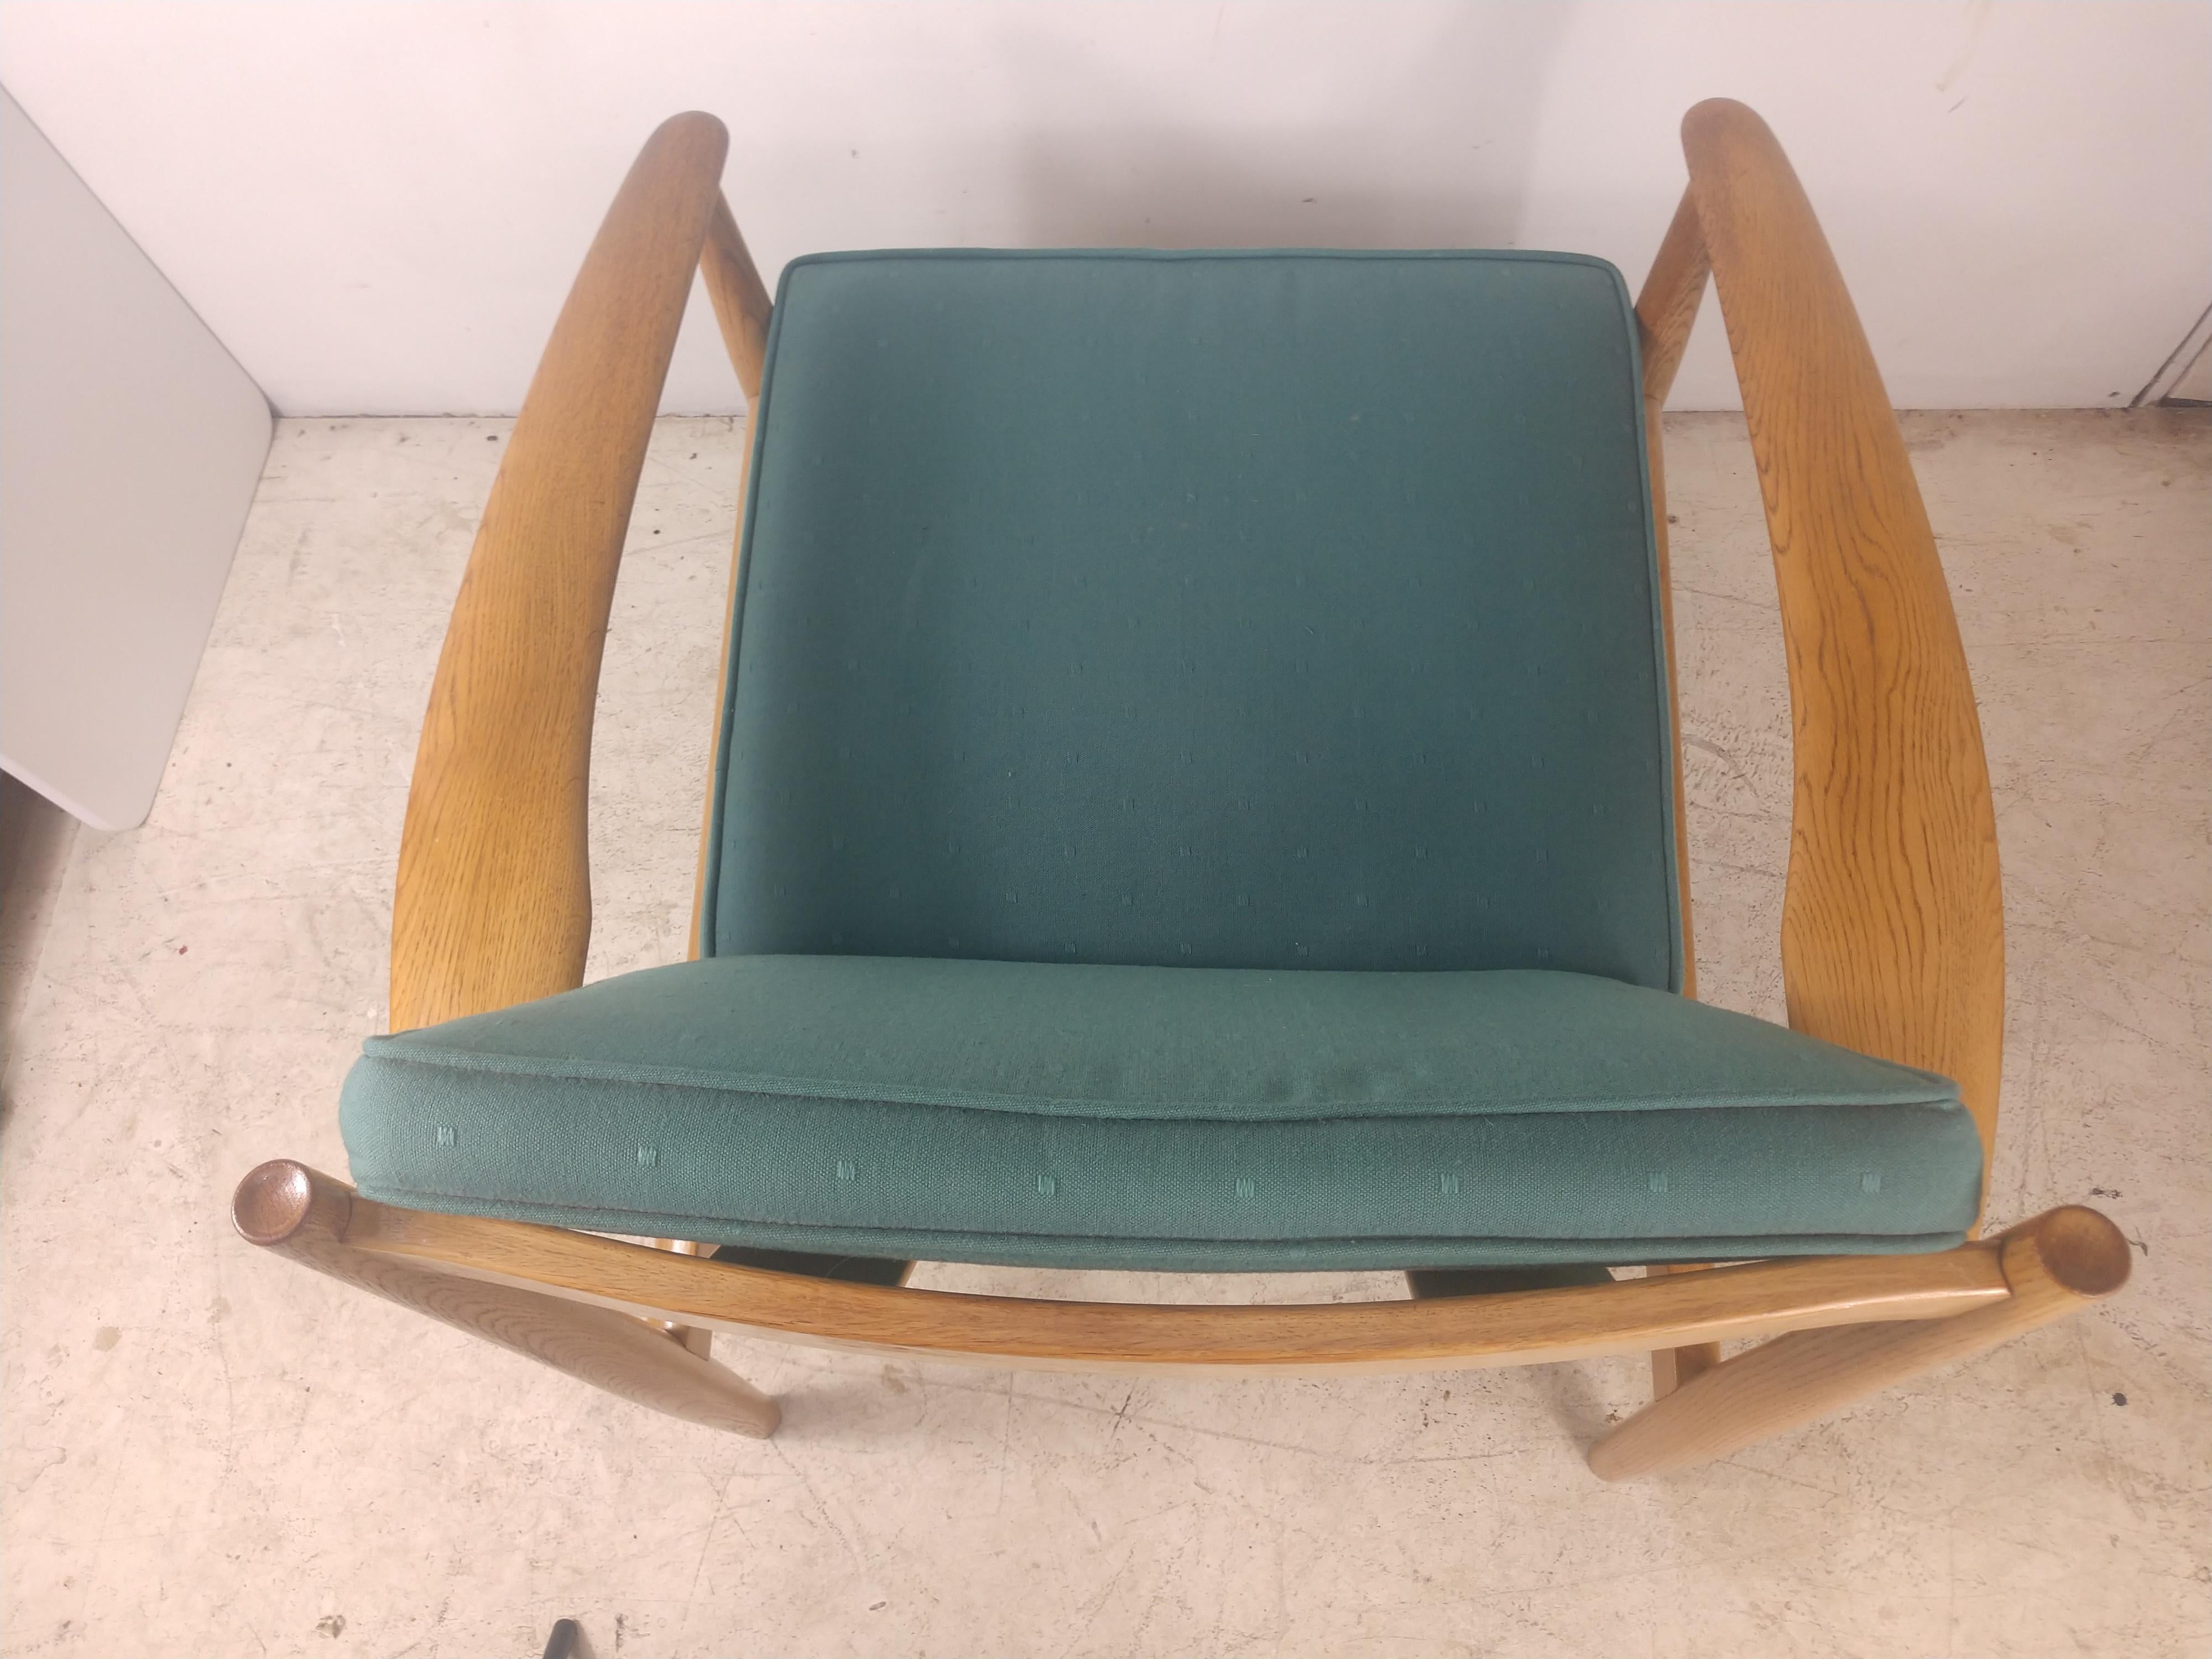 Beautiful sculpted oak frames with ample room make these a super comfortable lounge chair . Model # 118 by France & Sons c1960. Cushions are serviceable, no problems but could use an upgrade.
Seat hgt. is 16.